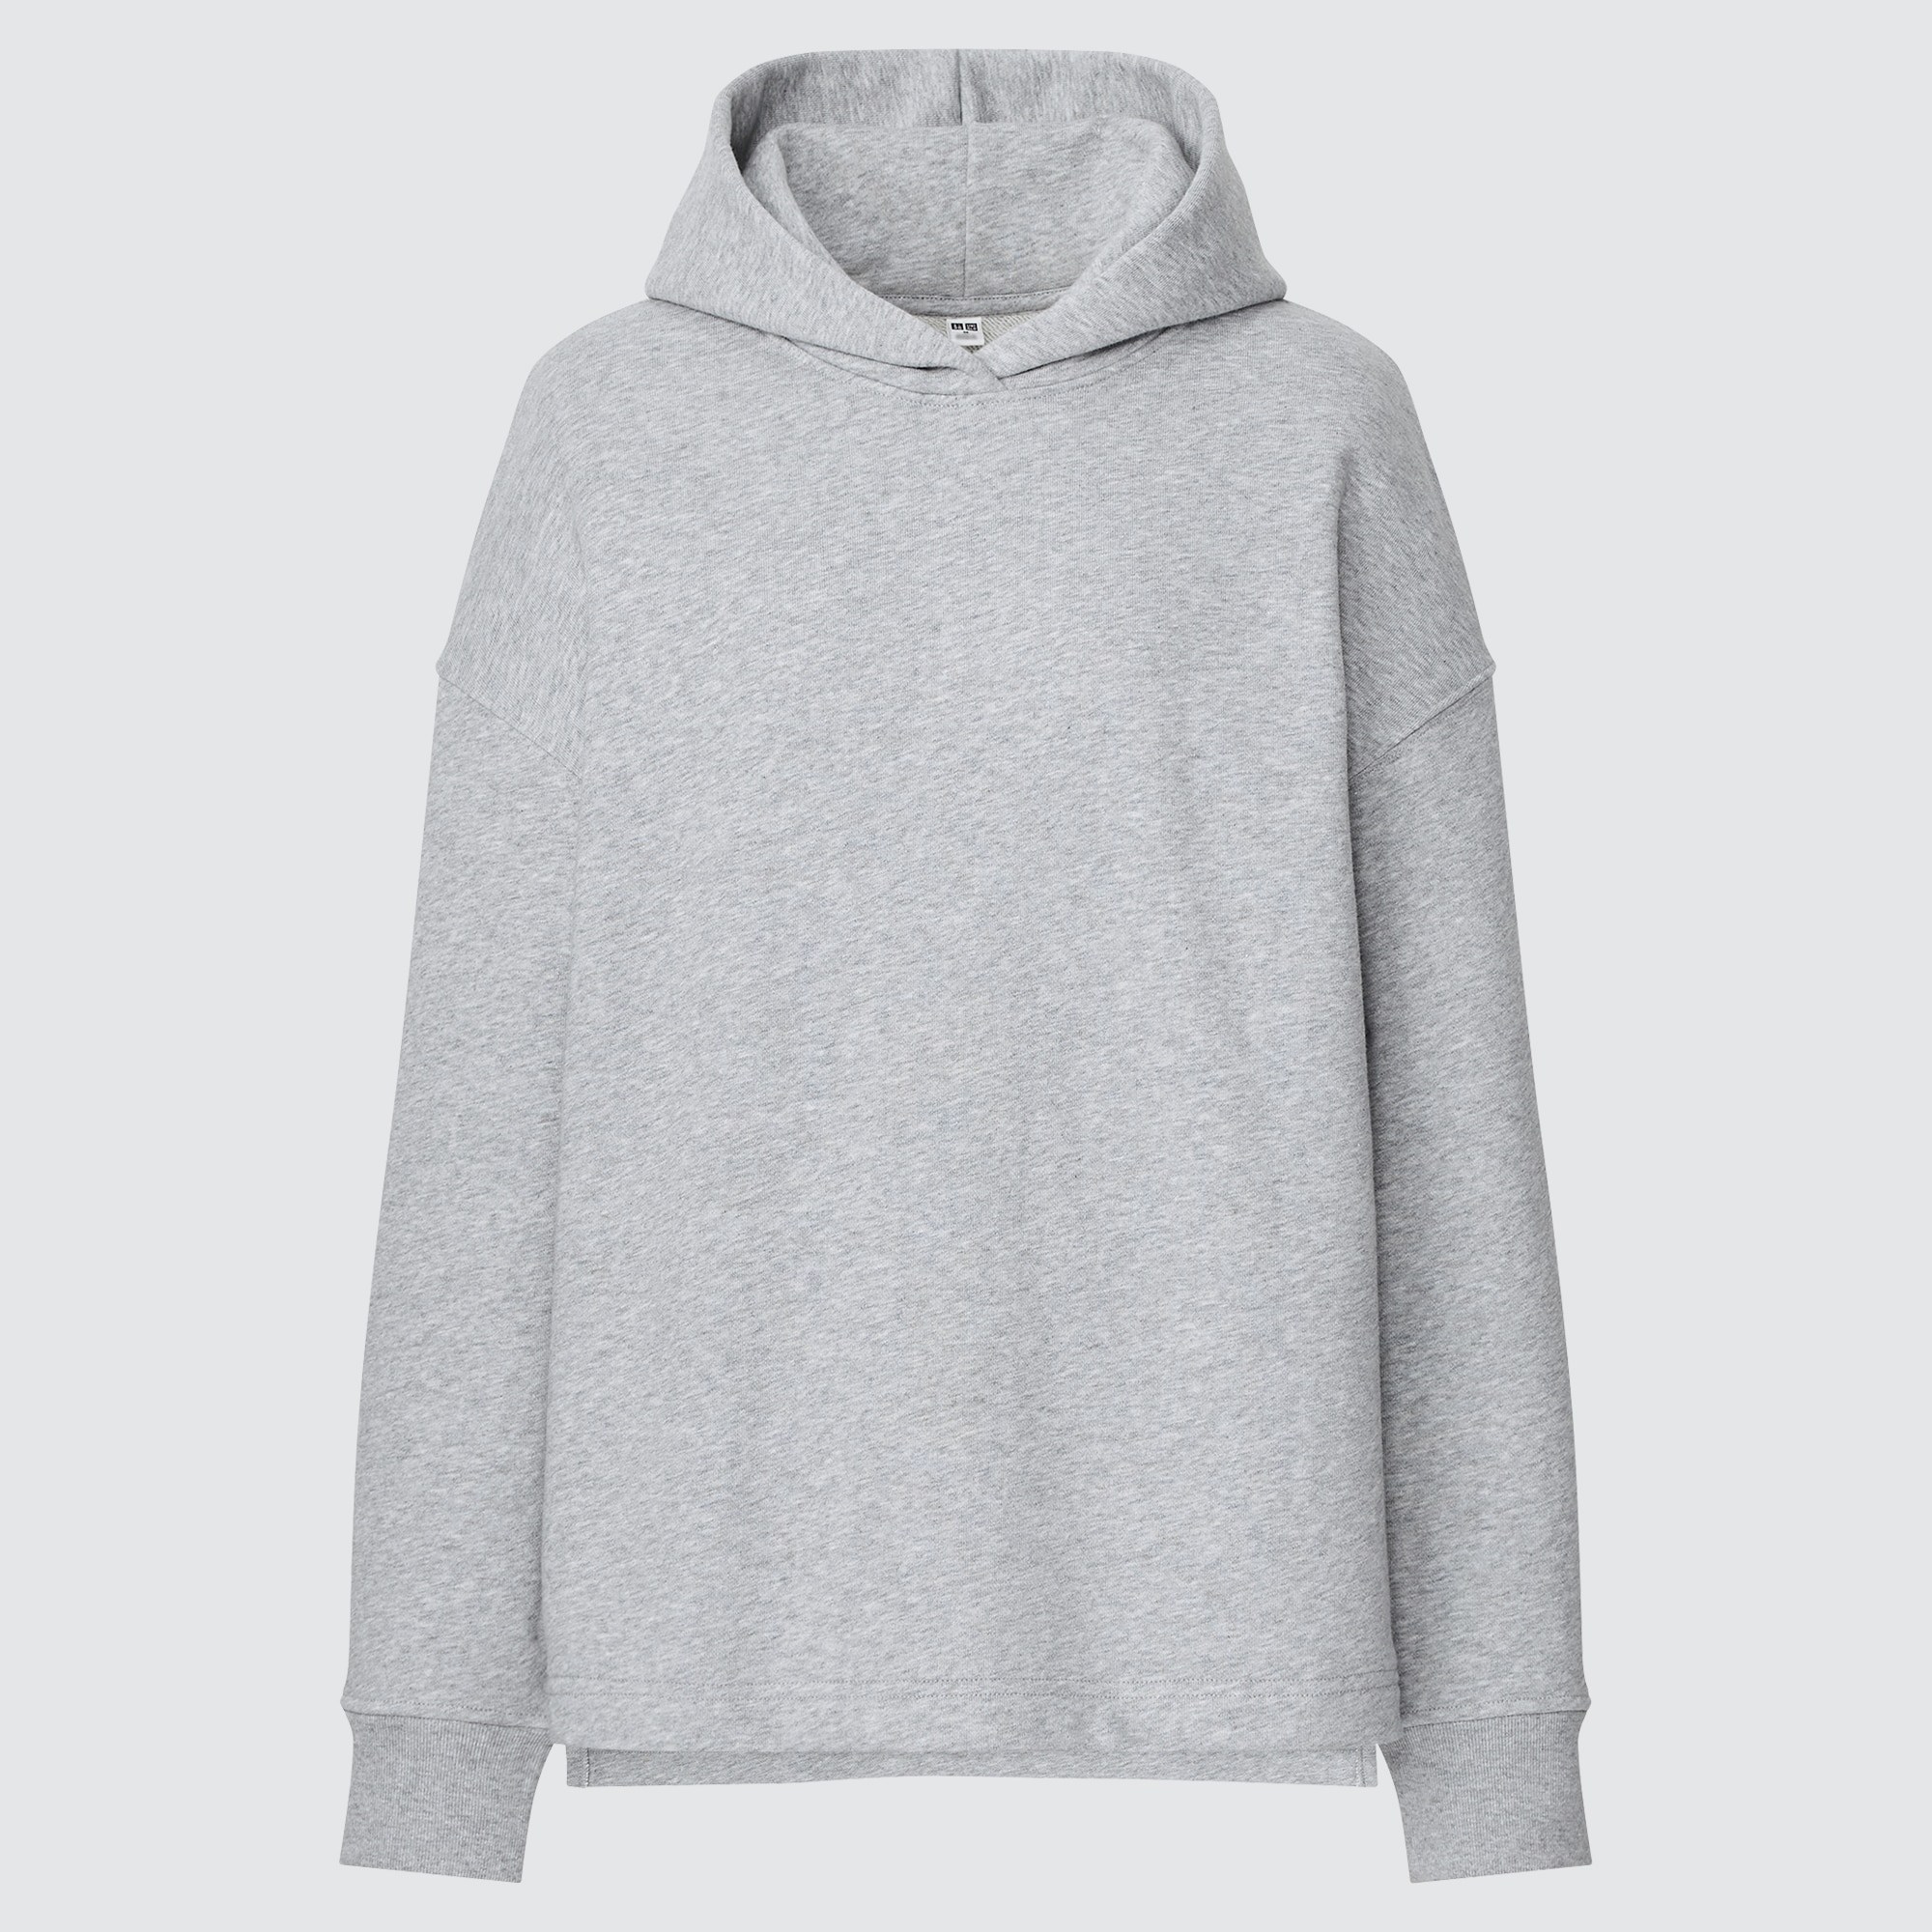 Check styling ideas for「Sweatpants、Sweat Slit Long-Sleeve Pullover Hoodie」